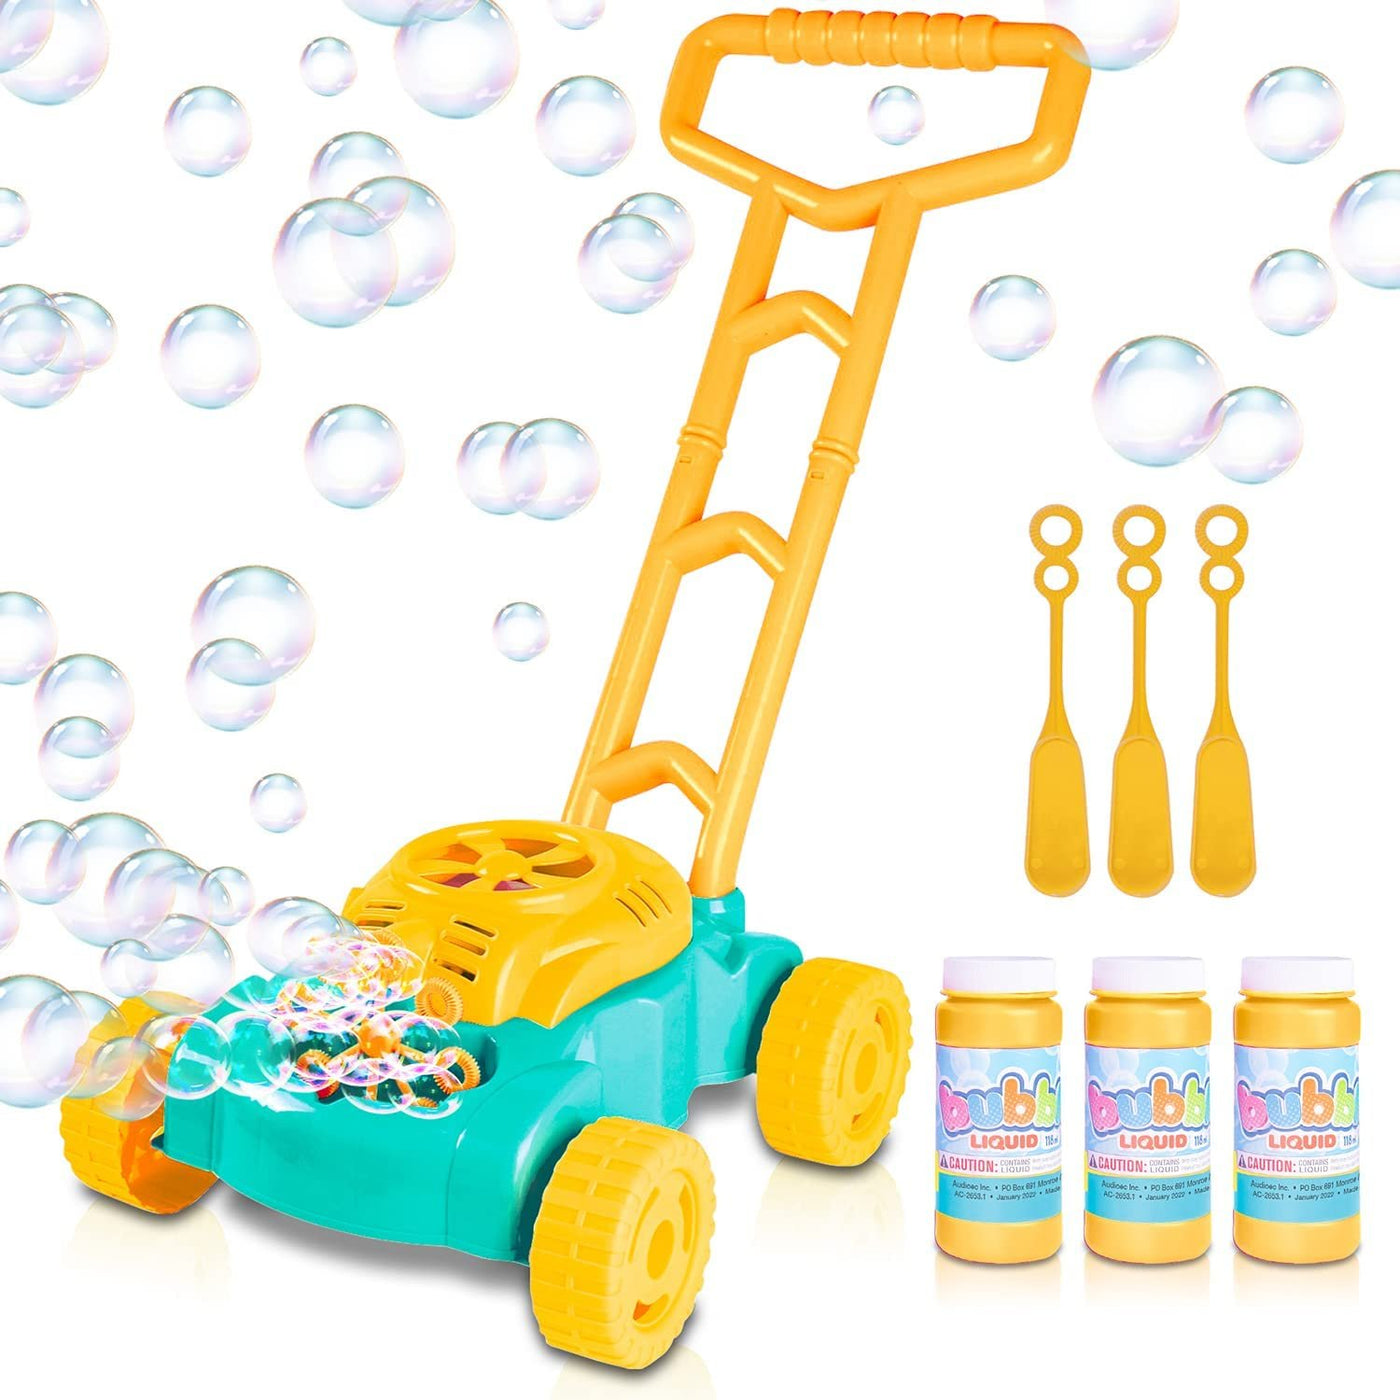 Bubble Lawn Mower for Kids, Electronic Outdoor Push Bubble Blower